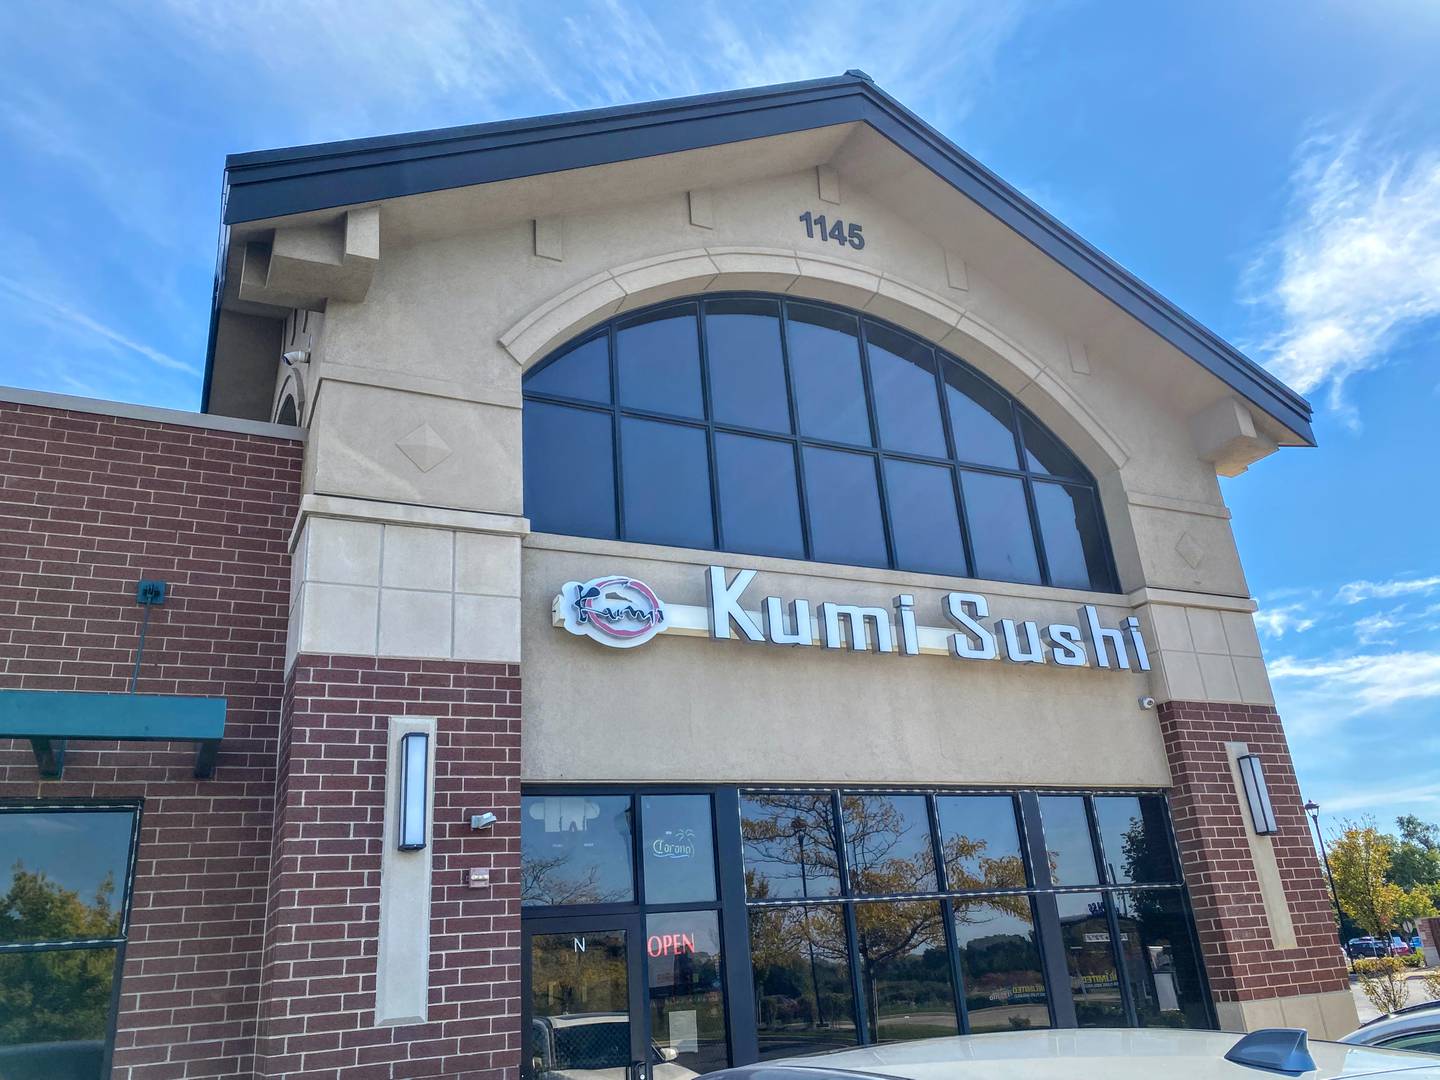 Kumi Sushi is located on Route 31 in the Crystal Lake shopping plaza that also holds the Walmart.